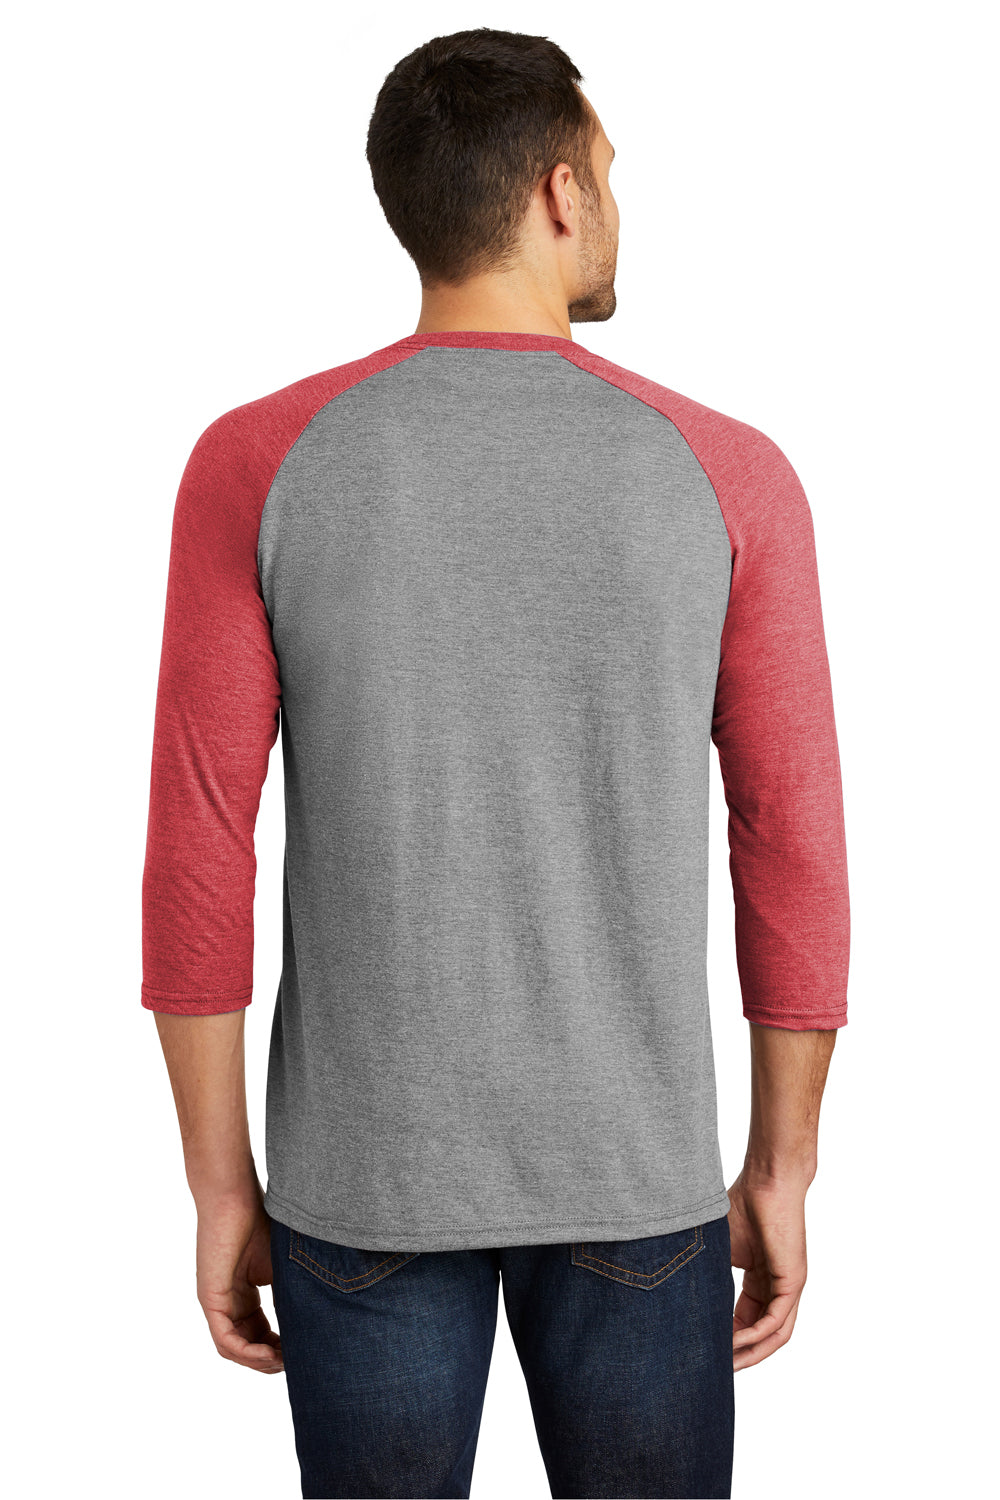 District DM136 Mens Perfect Tri 3/4 Sleeve Crewneck T-Shirt Grey Frost/Red Back